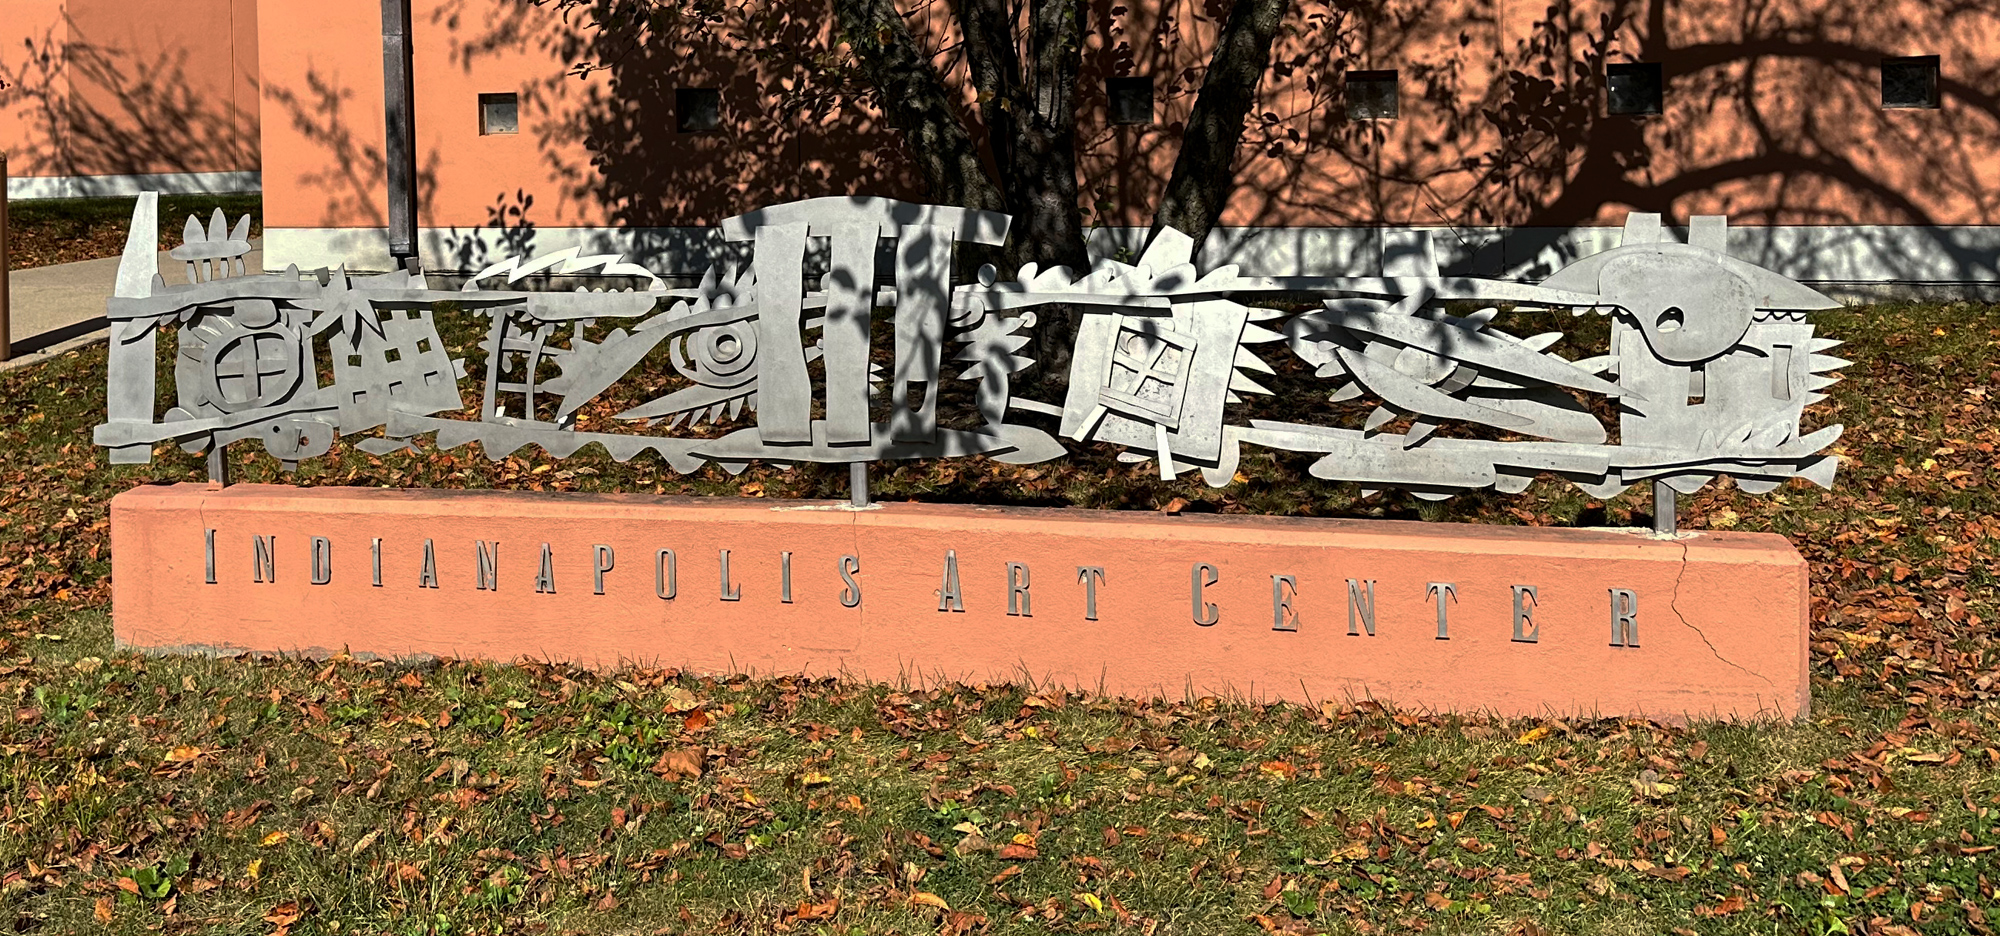 This beautiful sign welcomes you to the Art Center